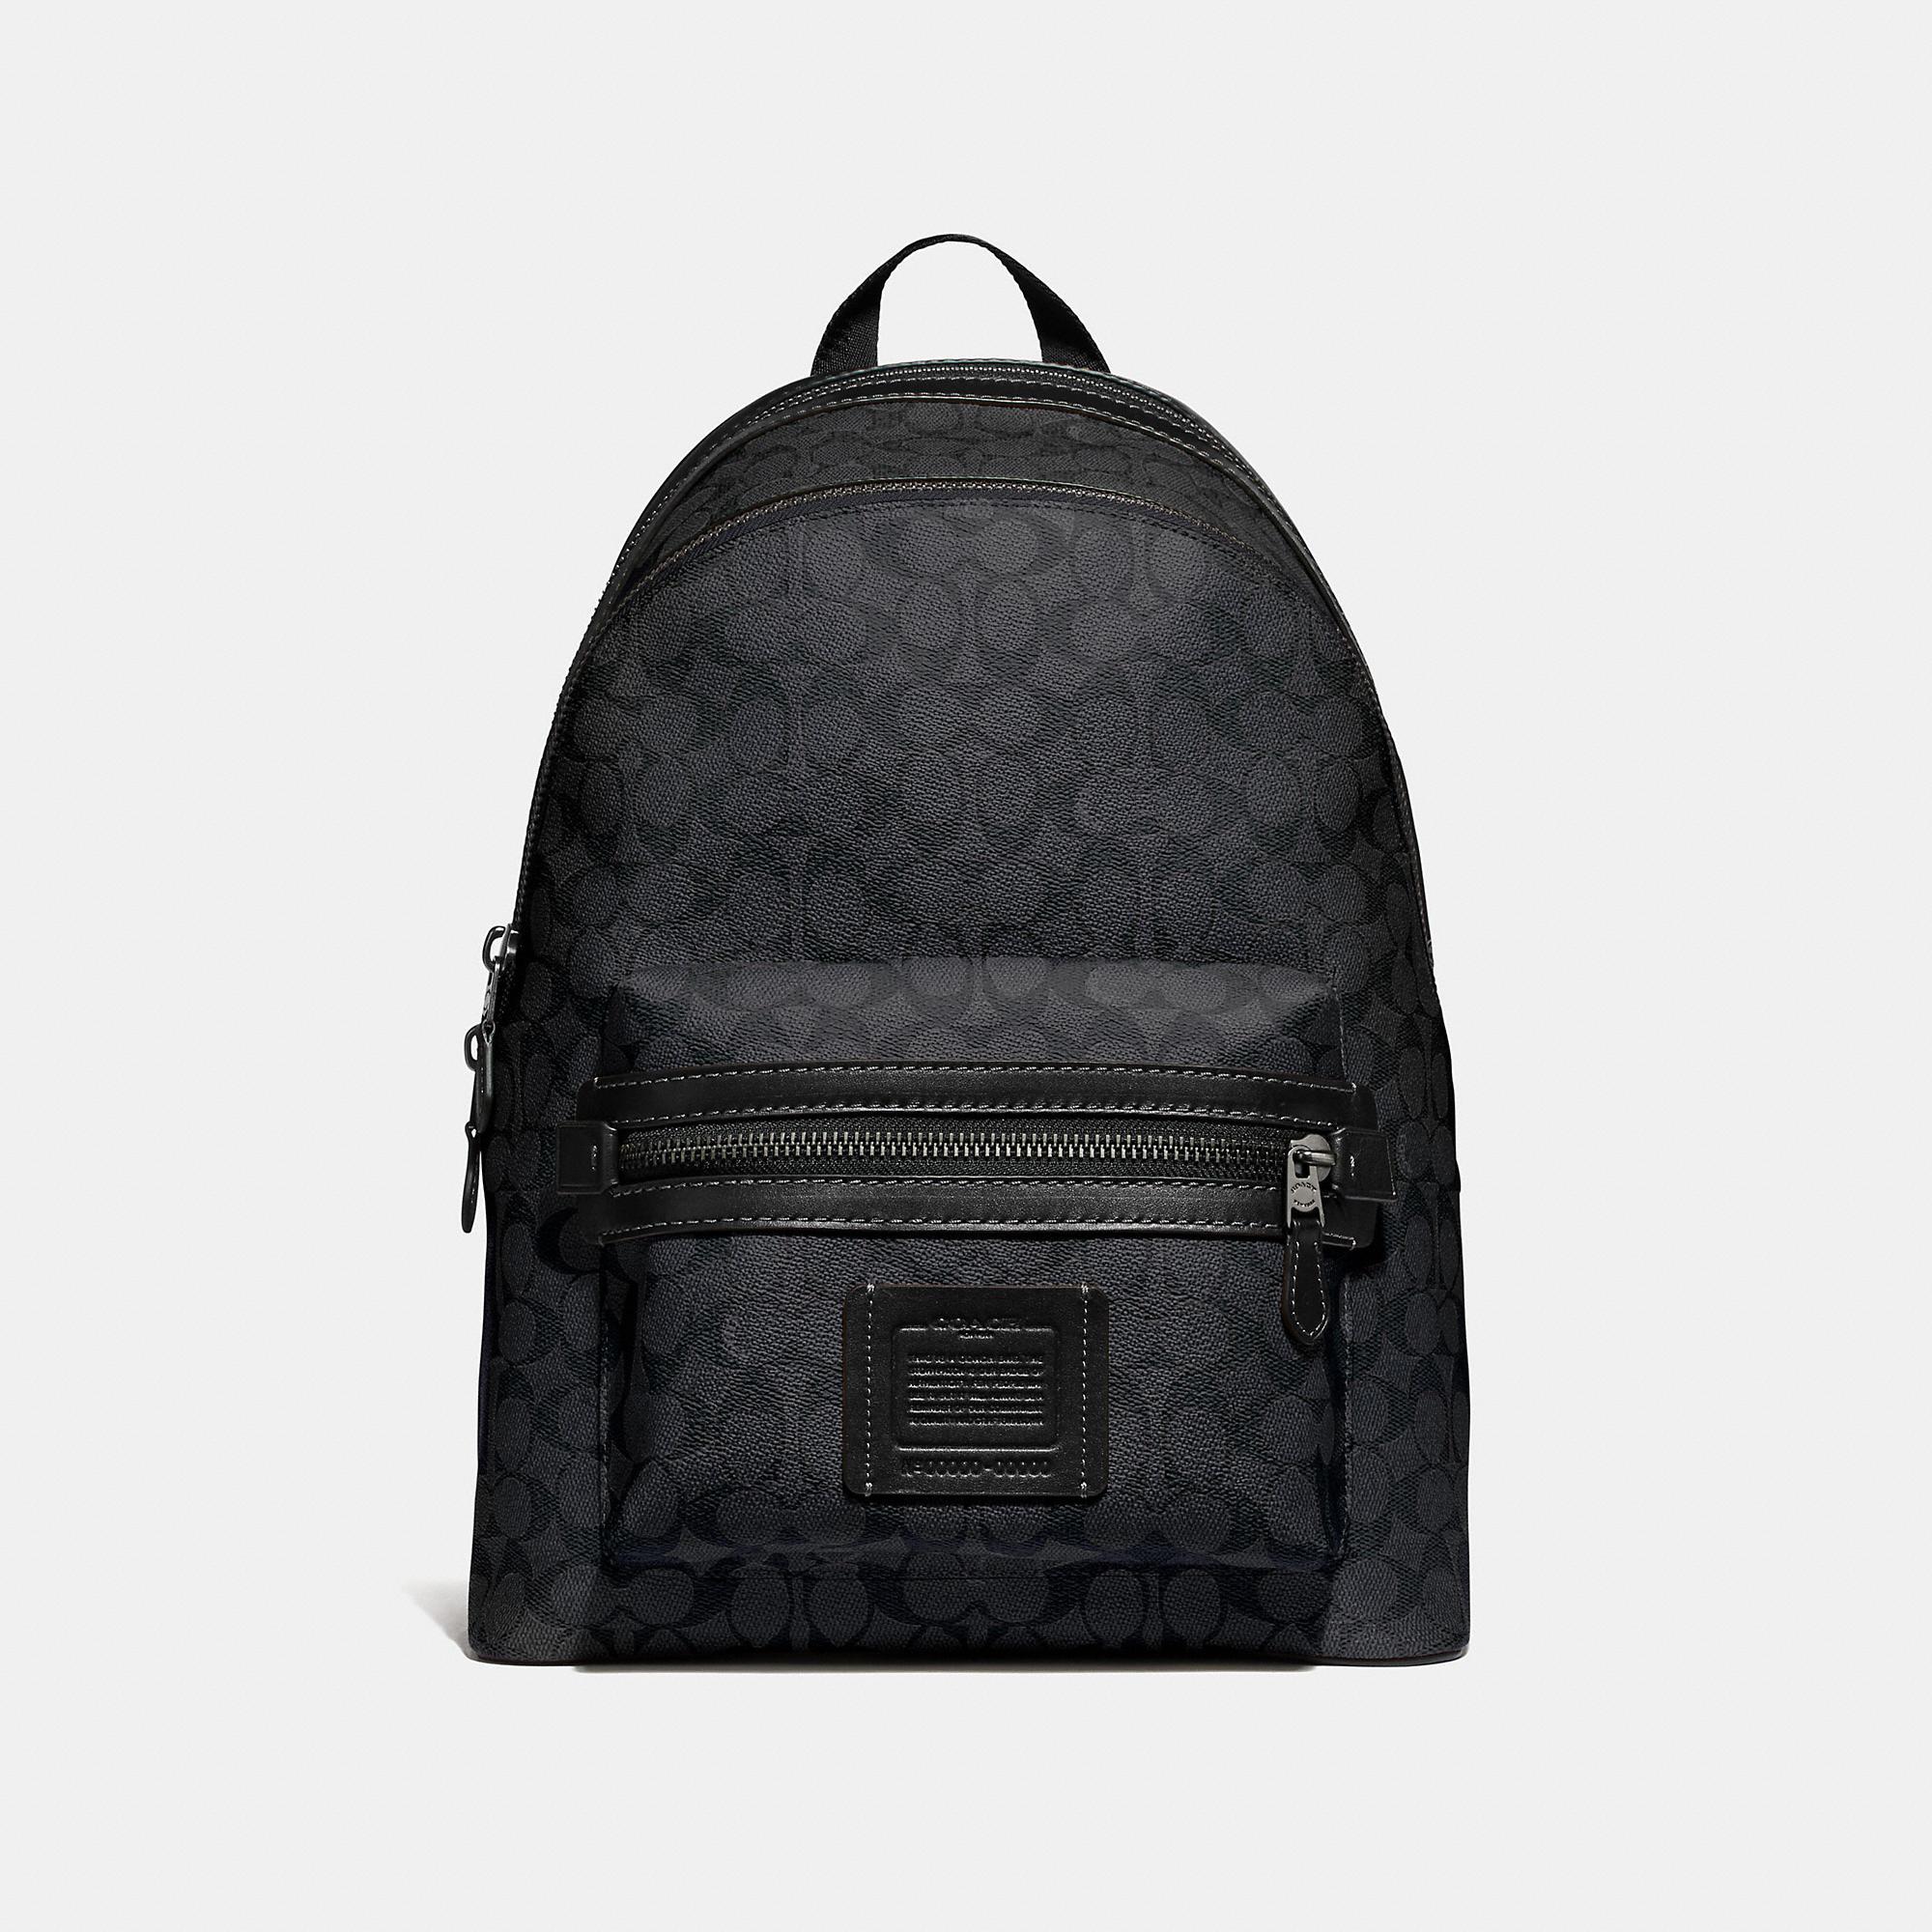 COACH Academy Backpack In Signature Canvas in Black for Men - Lyst